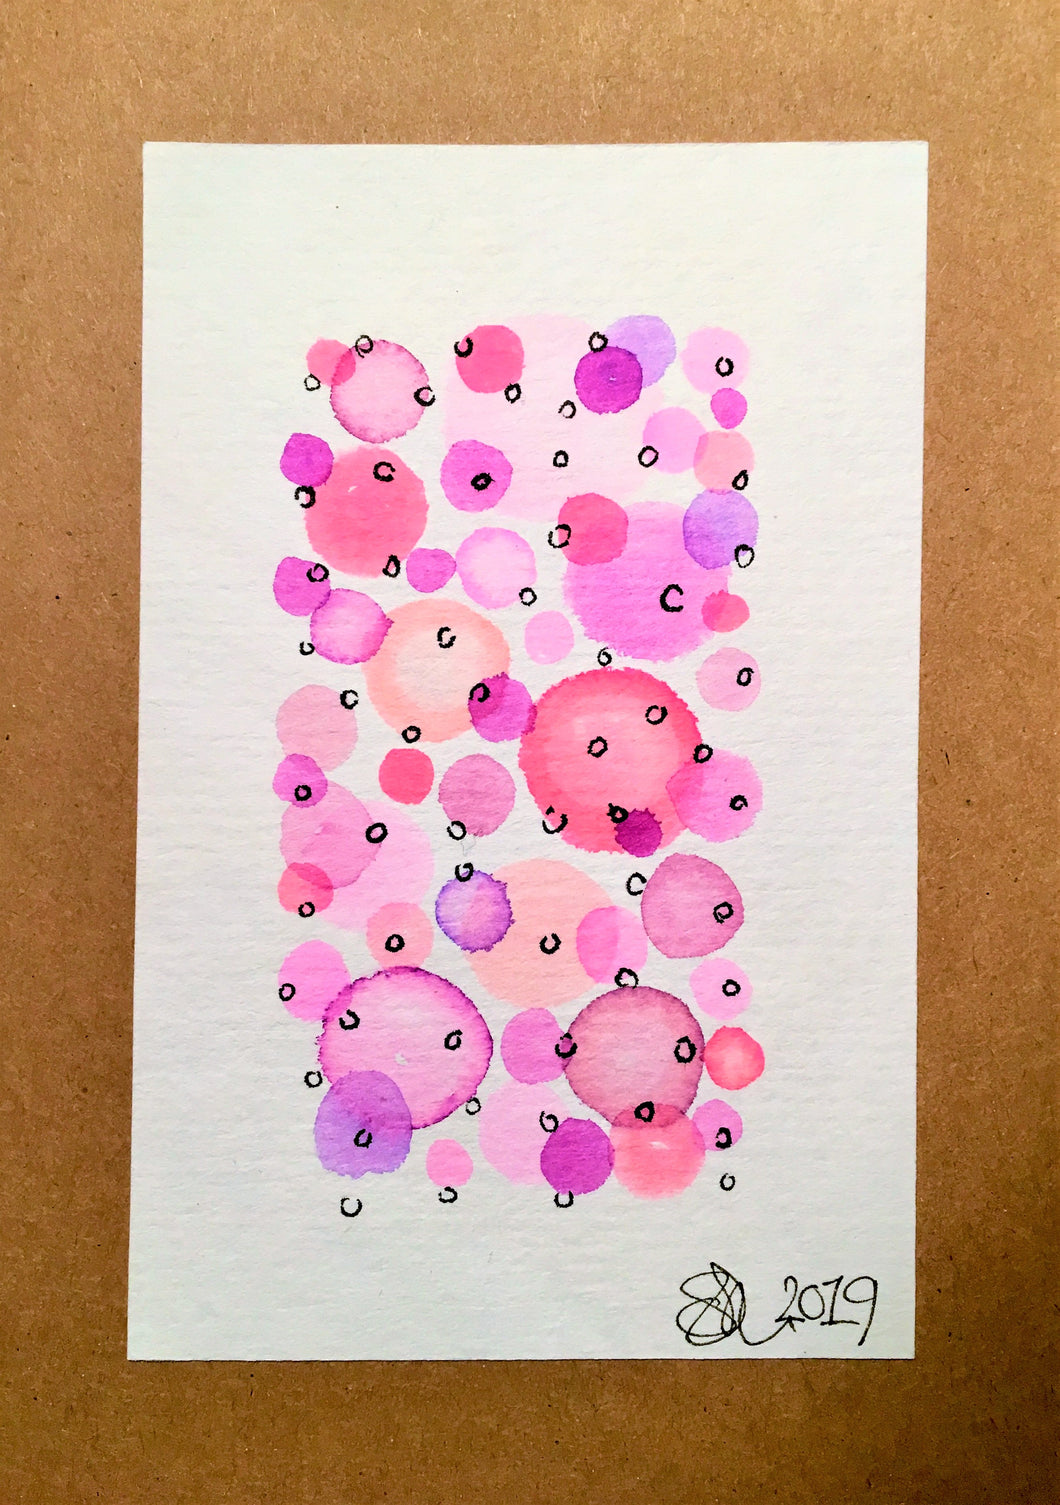 Handpainted Watercolour Greeting Card - Abstract Bubbles Pink/Purple/Lilac with Ink Circle Design - eDgE dEsiGn London